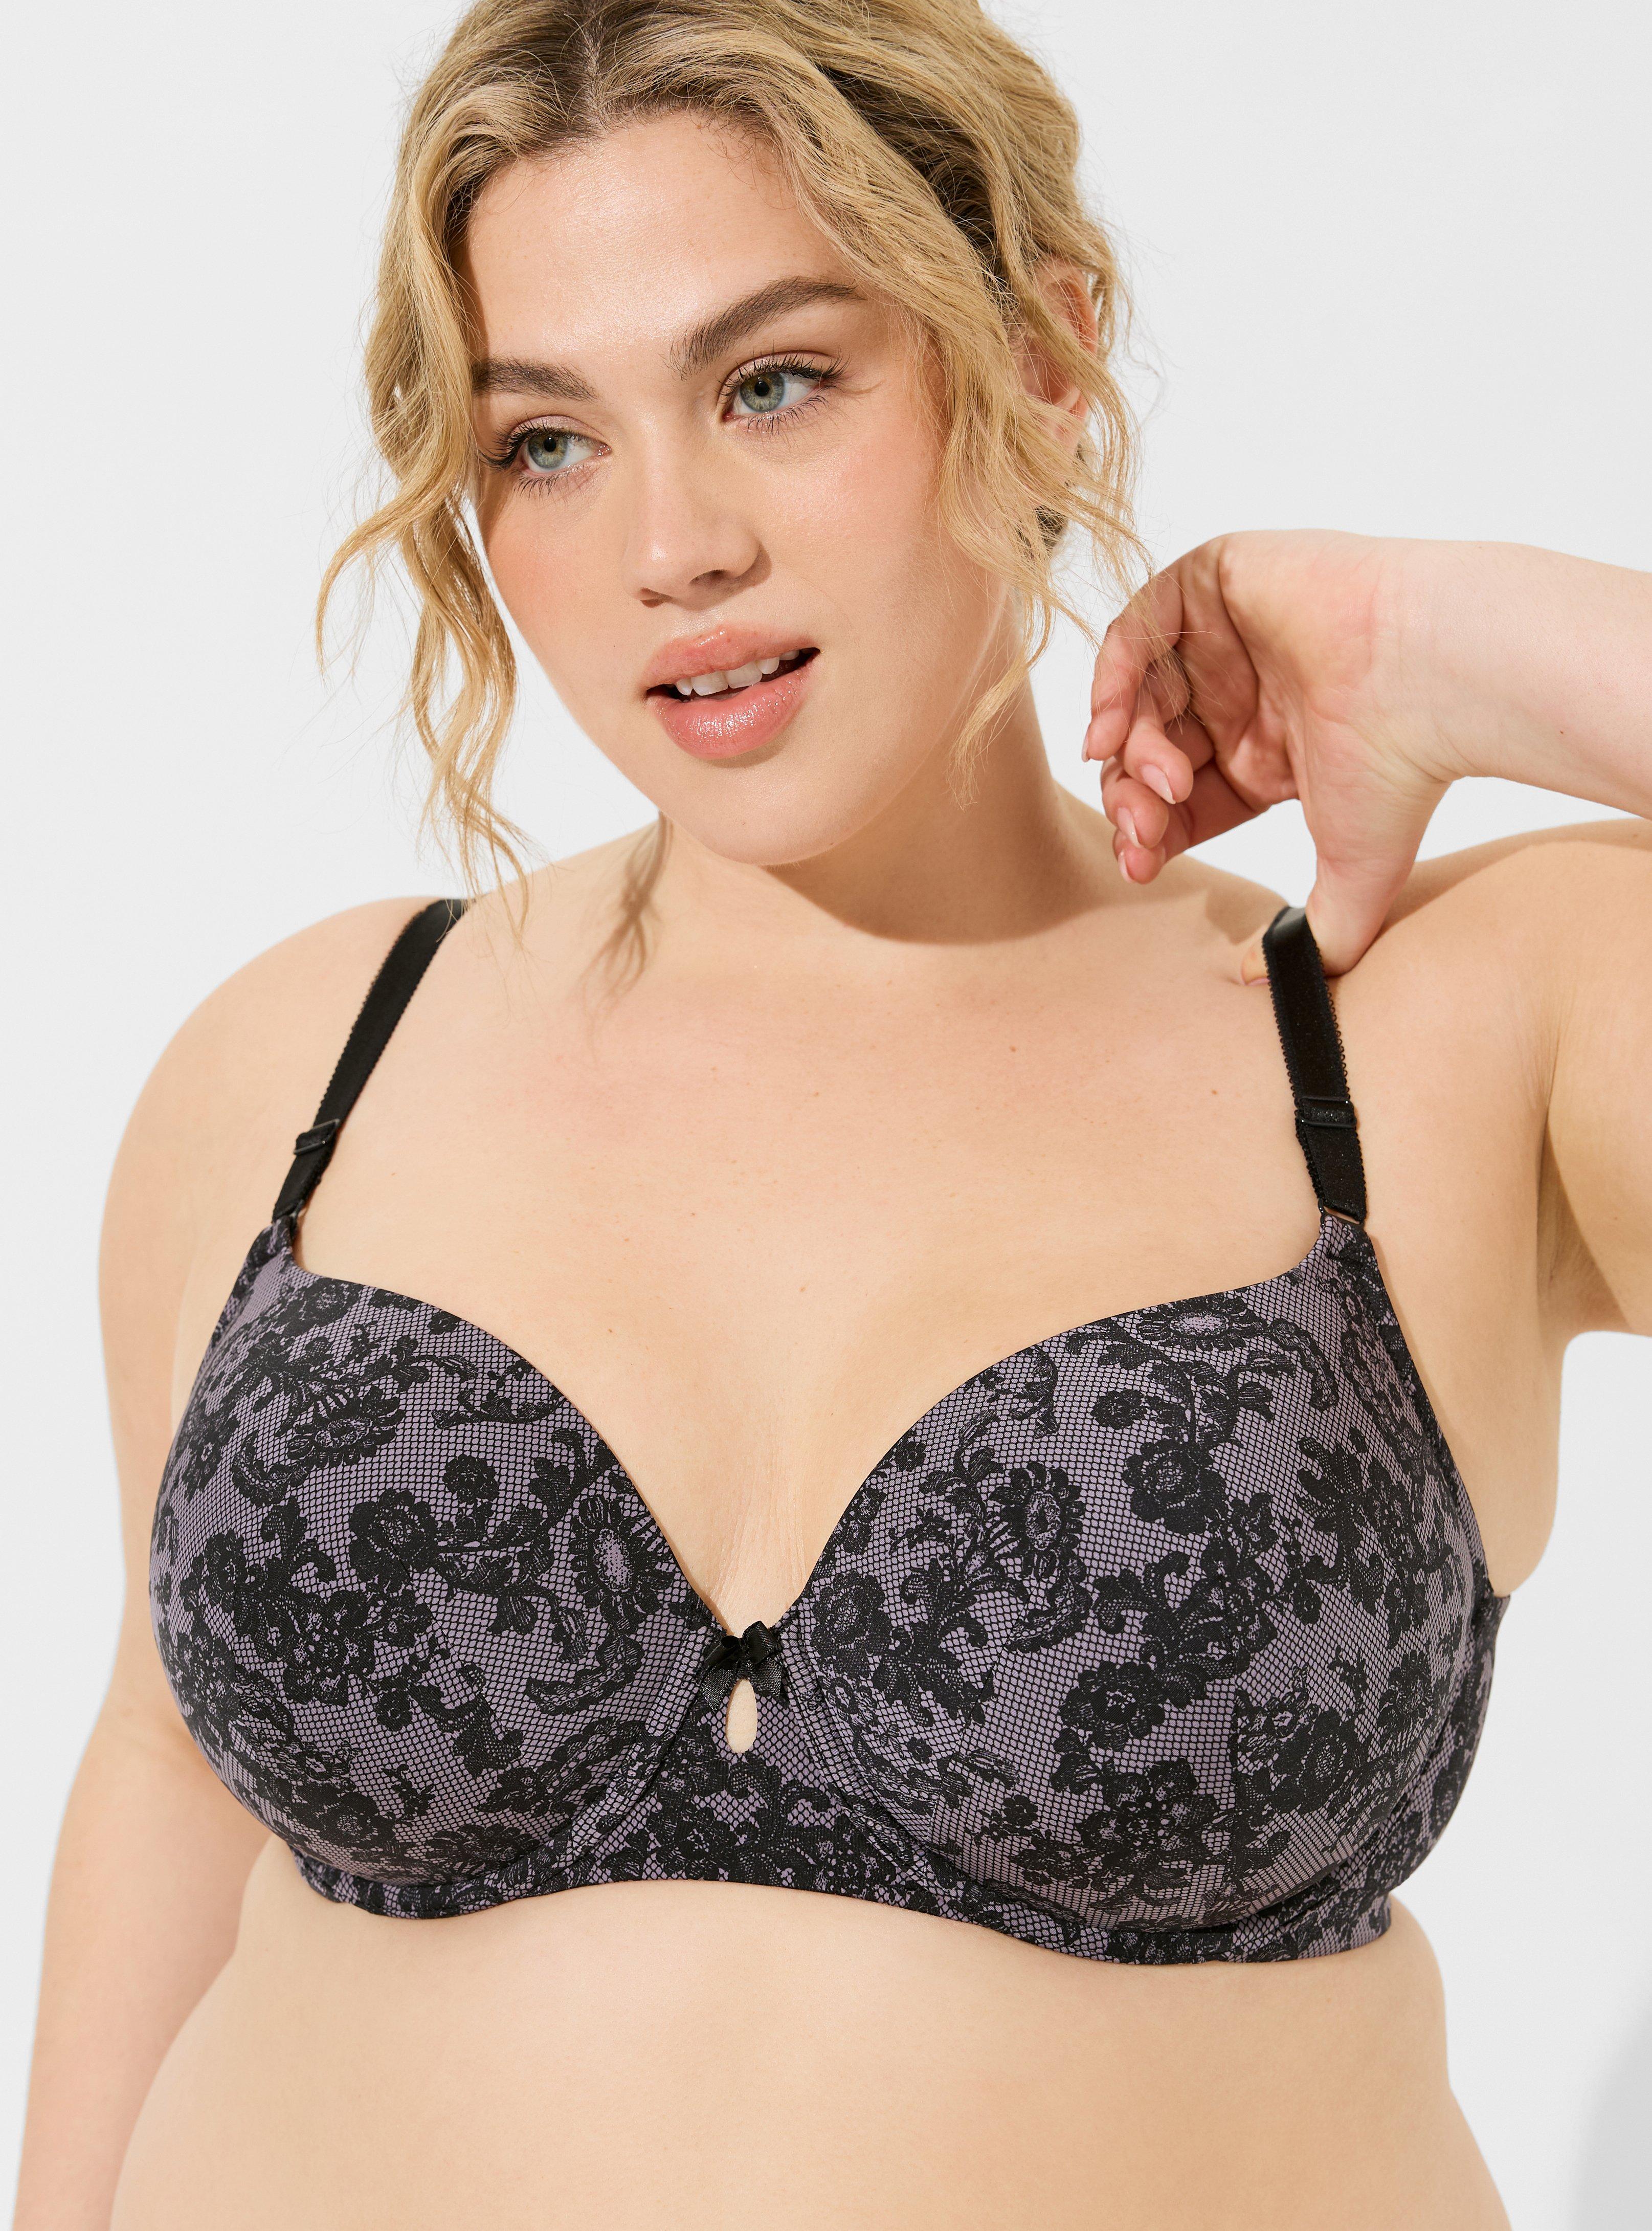 EVANS + Elenor Black and Nude Firm Support Bra